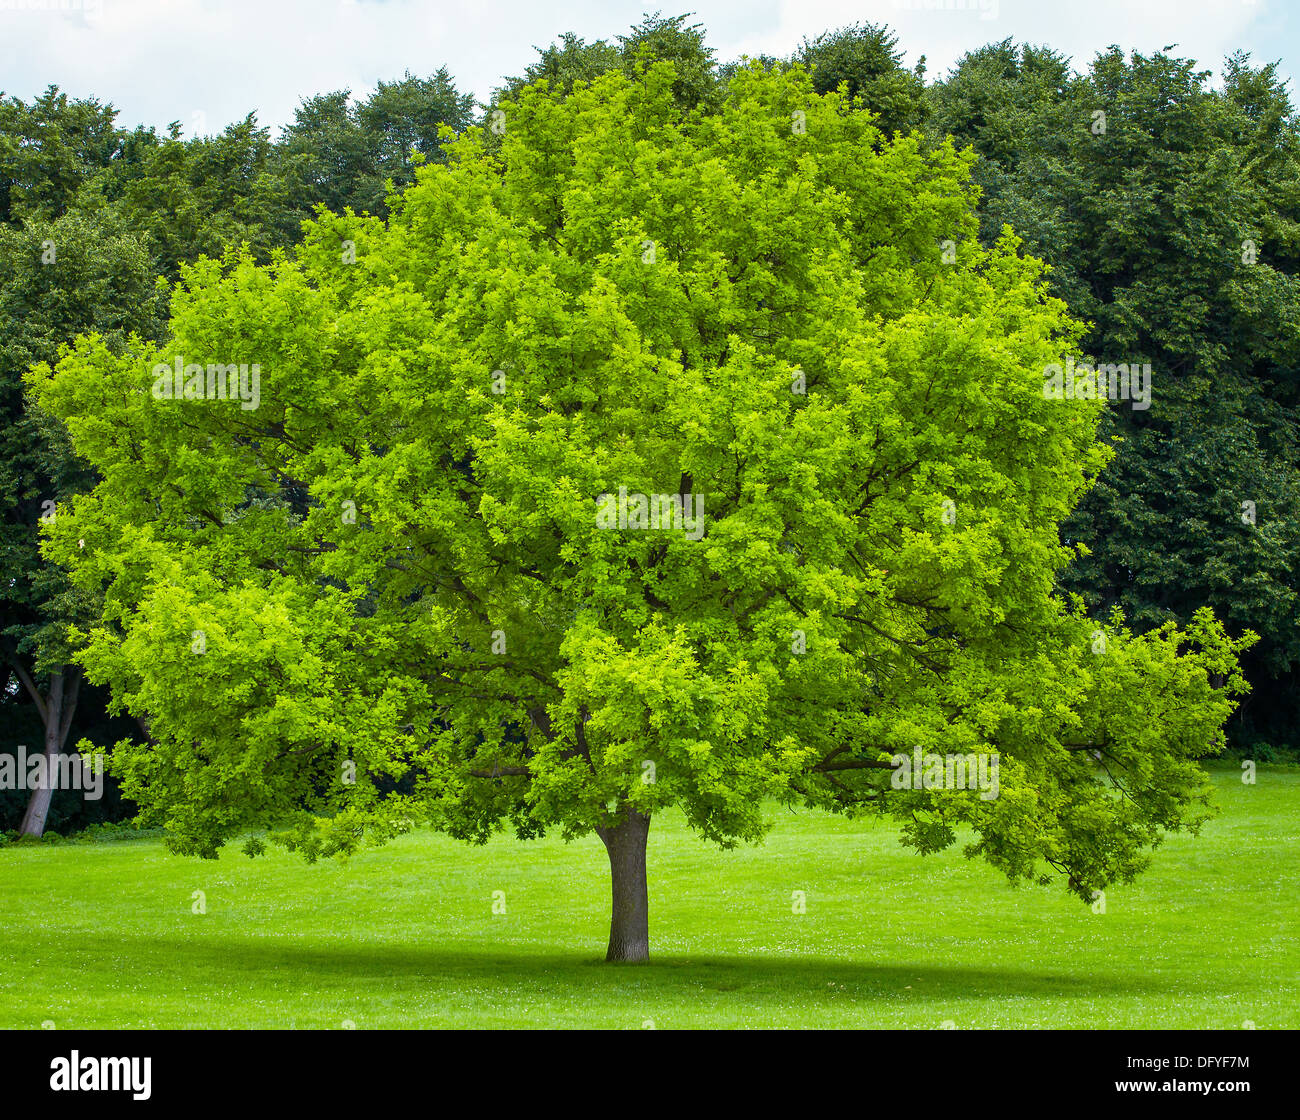 Single tree on a green grass lawn Stock Photo